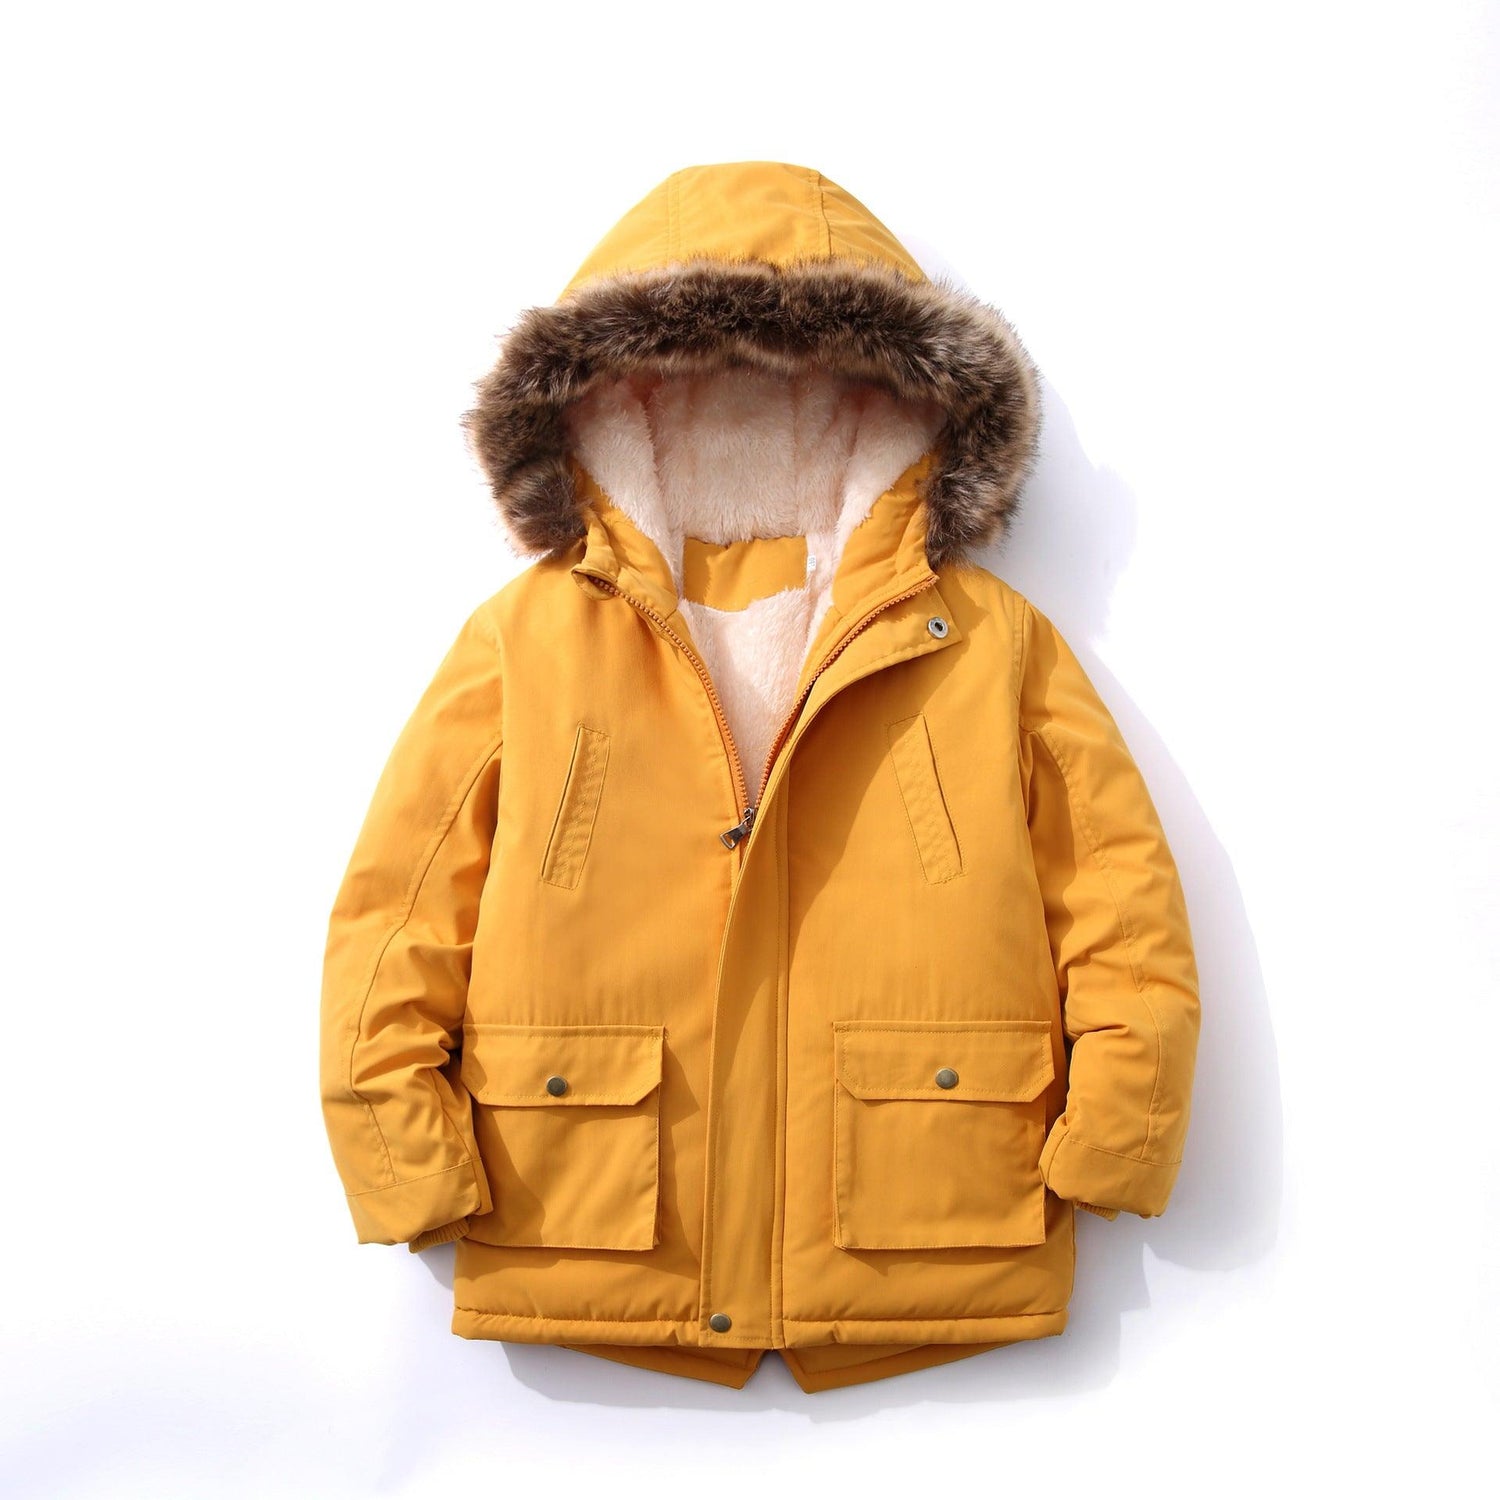 Stylish and Warm: Hooded Boys Padded Jacket for Cold Weather Adventures - Your-Look